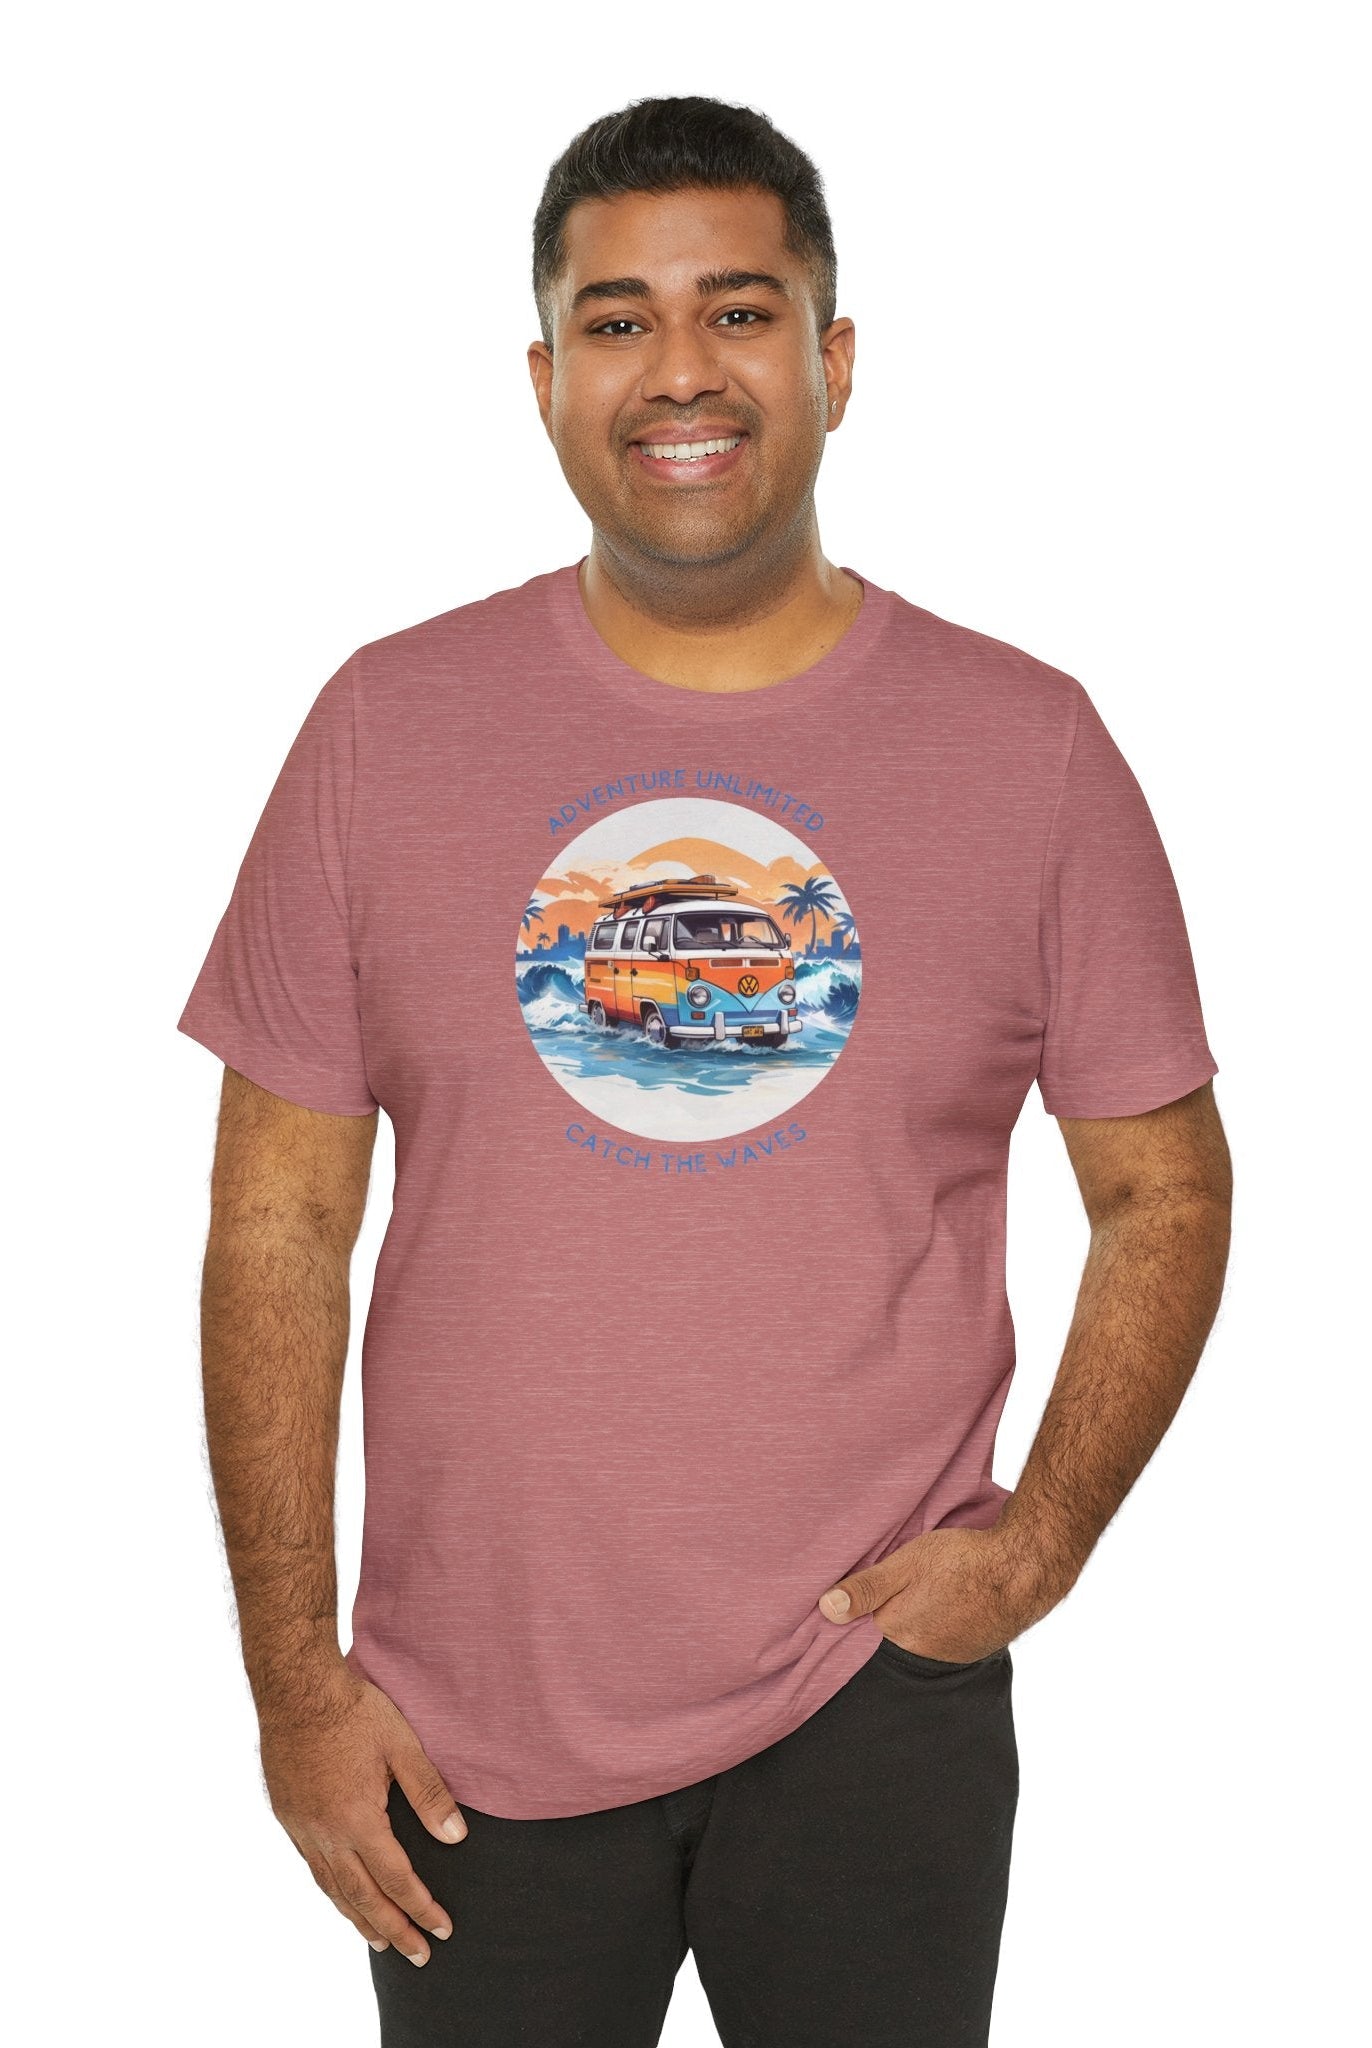 Adventure Unlimited - Surfing T-Shirt featuring a man with surfboard, direct-to-garment printed item